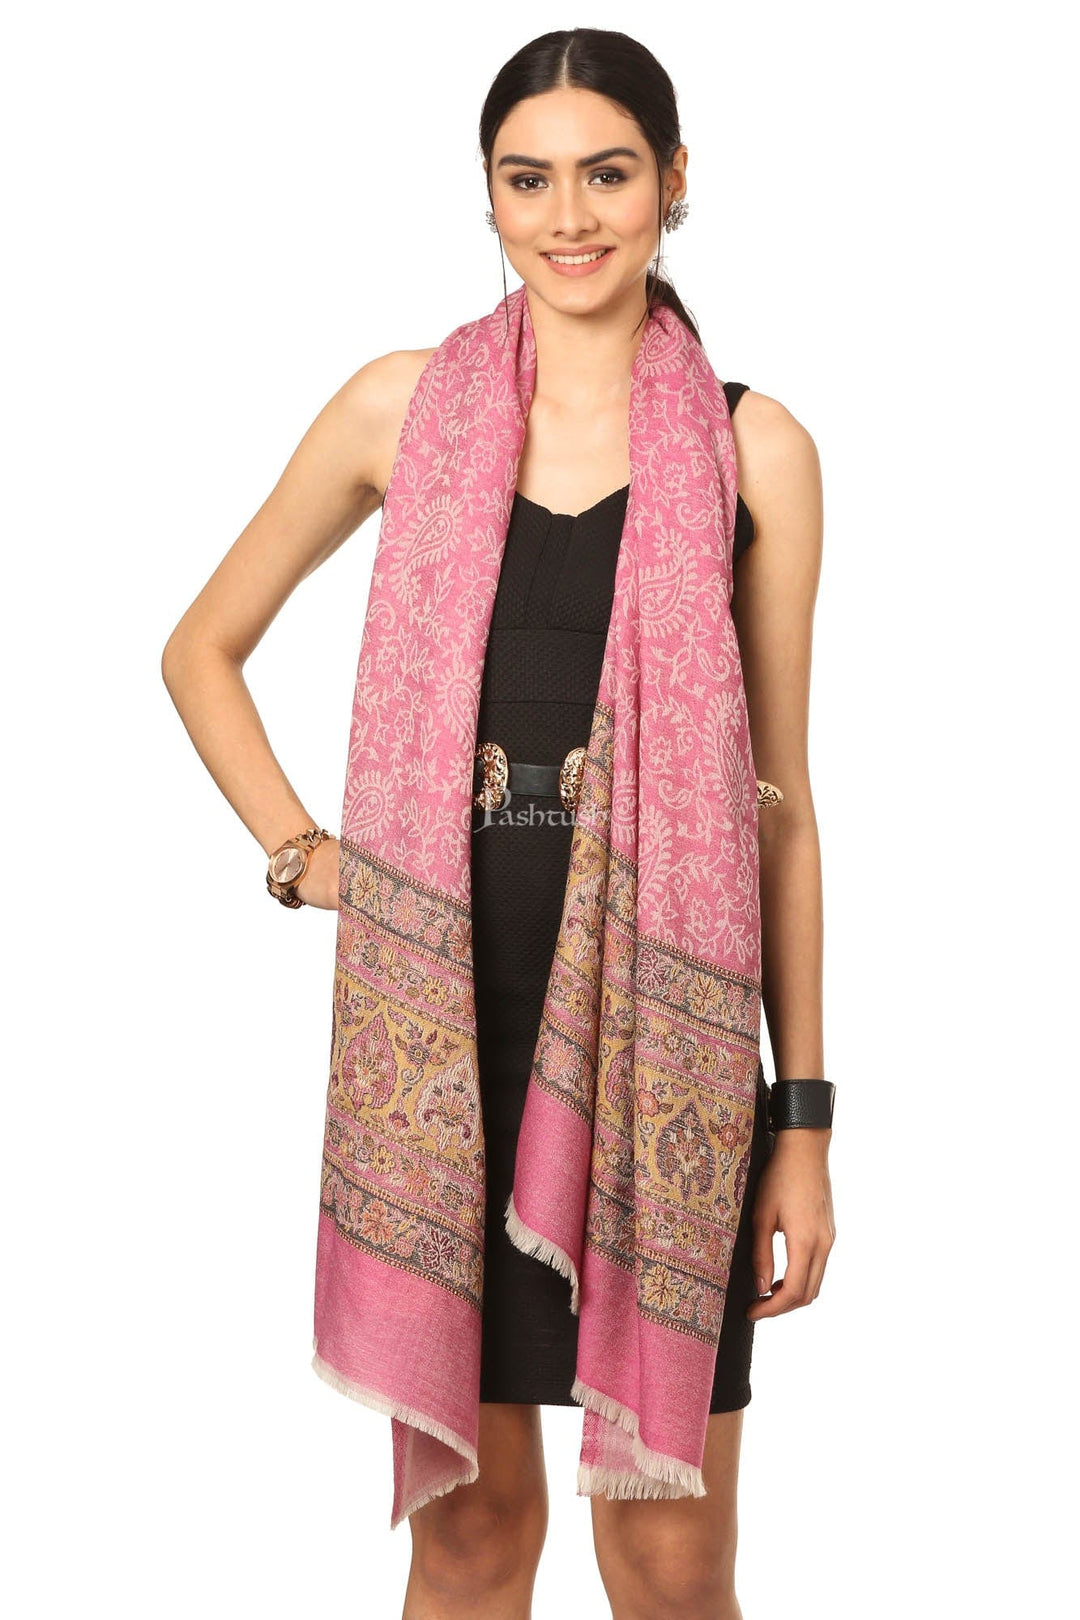 Pashtush India Womens Stoles and Scarves Scarf Pashtush Fine Wool Luxury Striped Design Scarf, Stole, Weaving Design - Pink